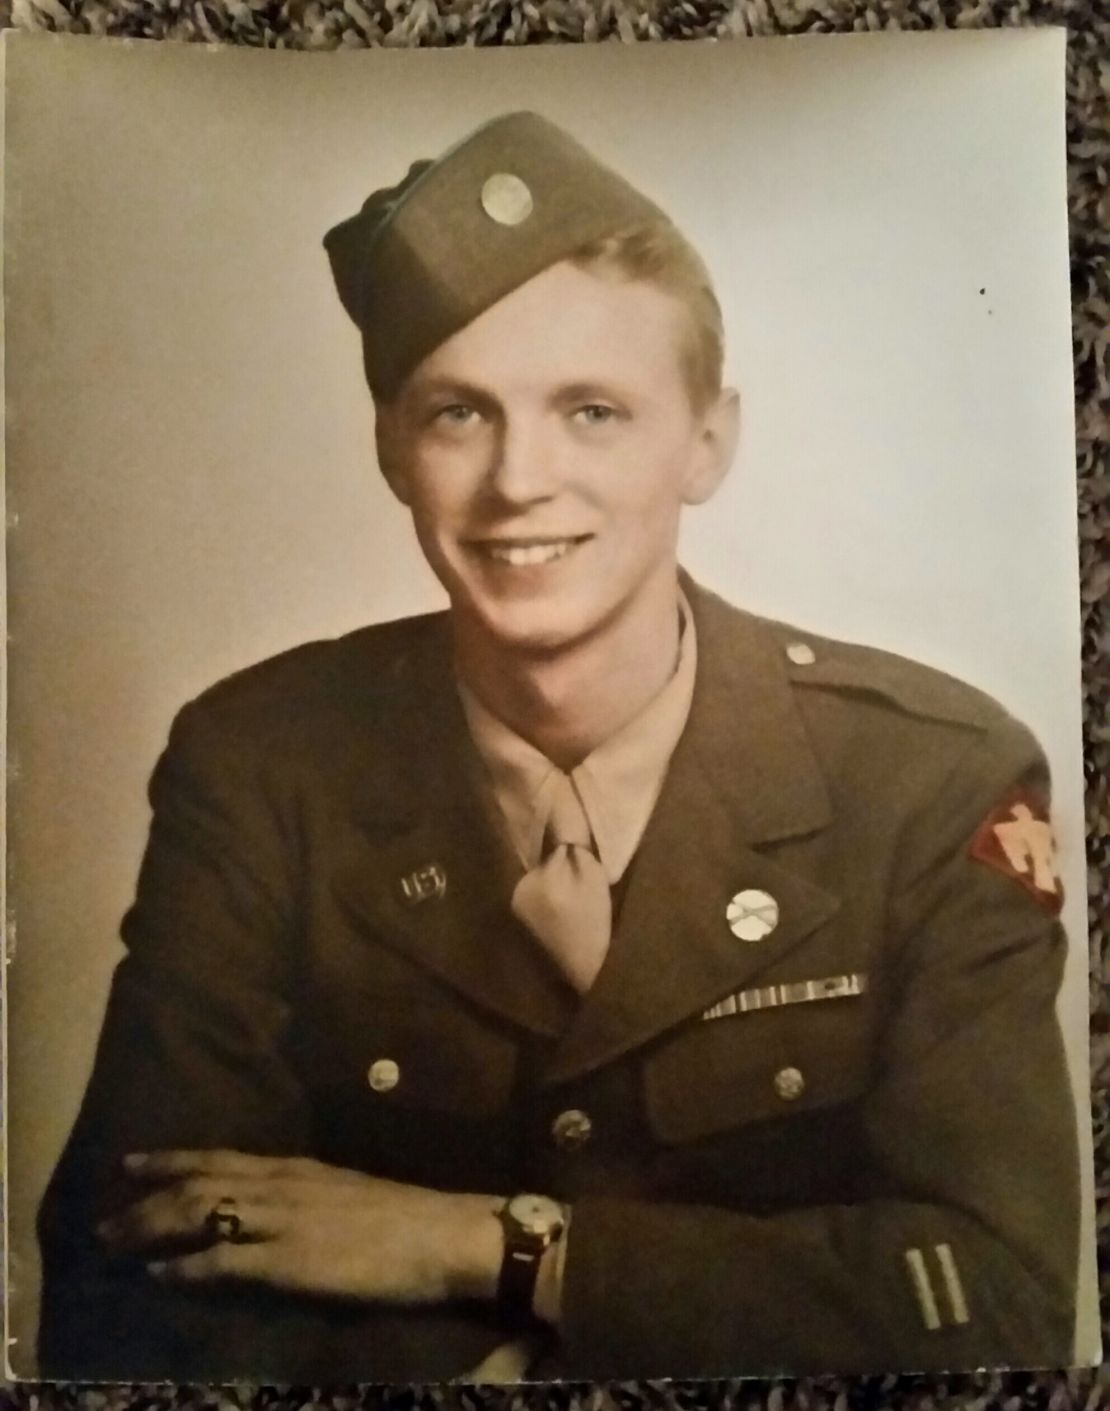 Private Charlie Nease, in his 45th Infantry Division uniform.